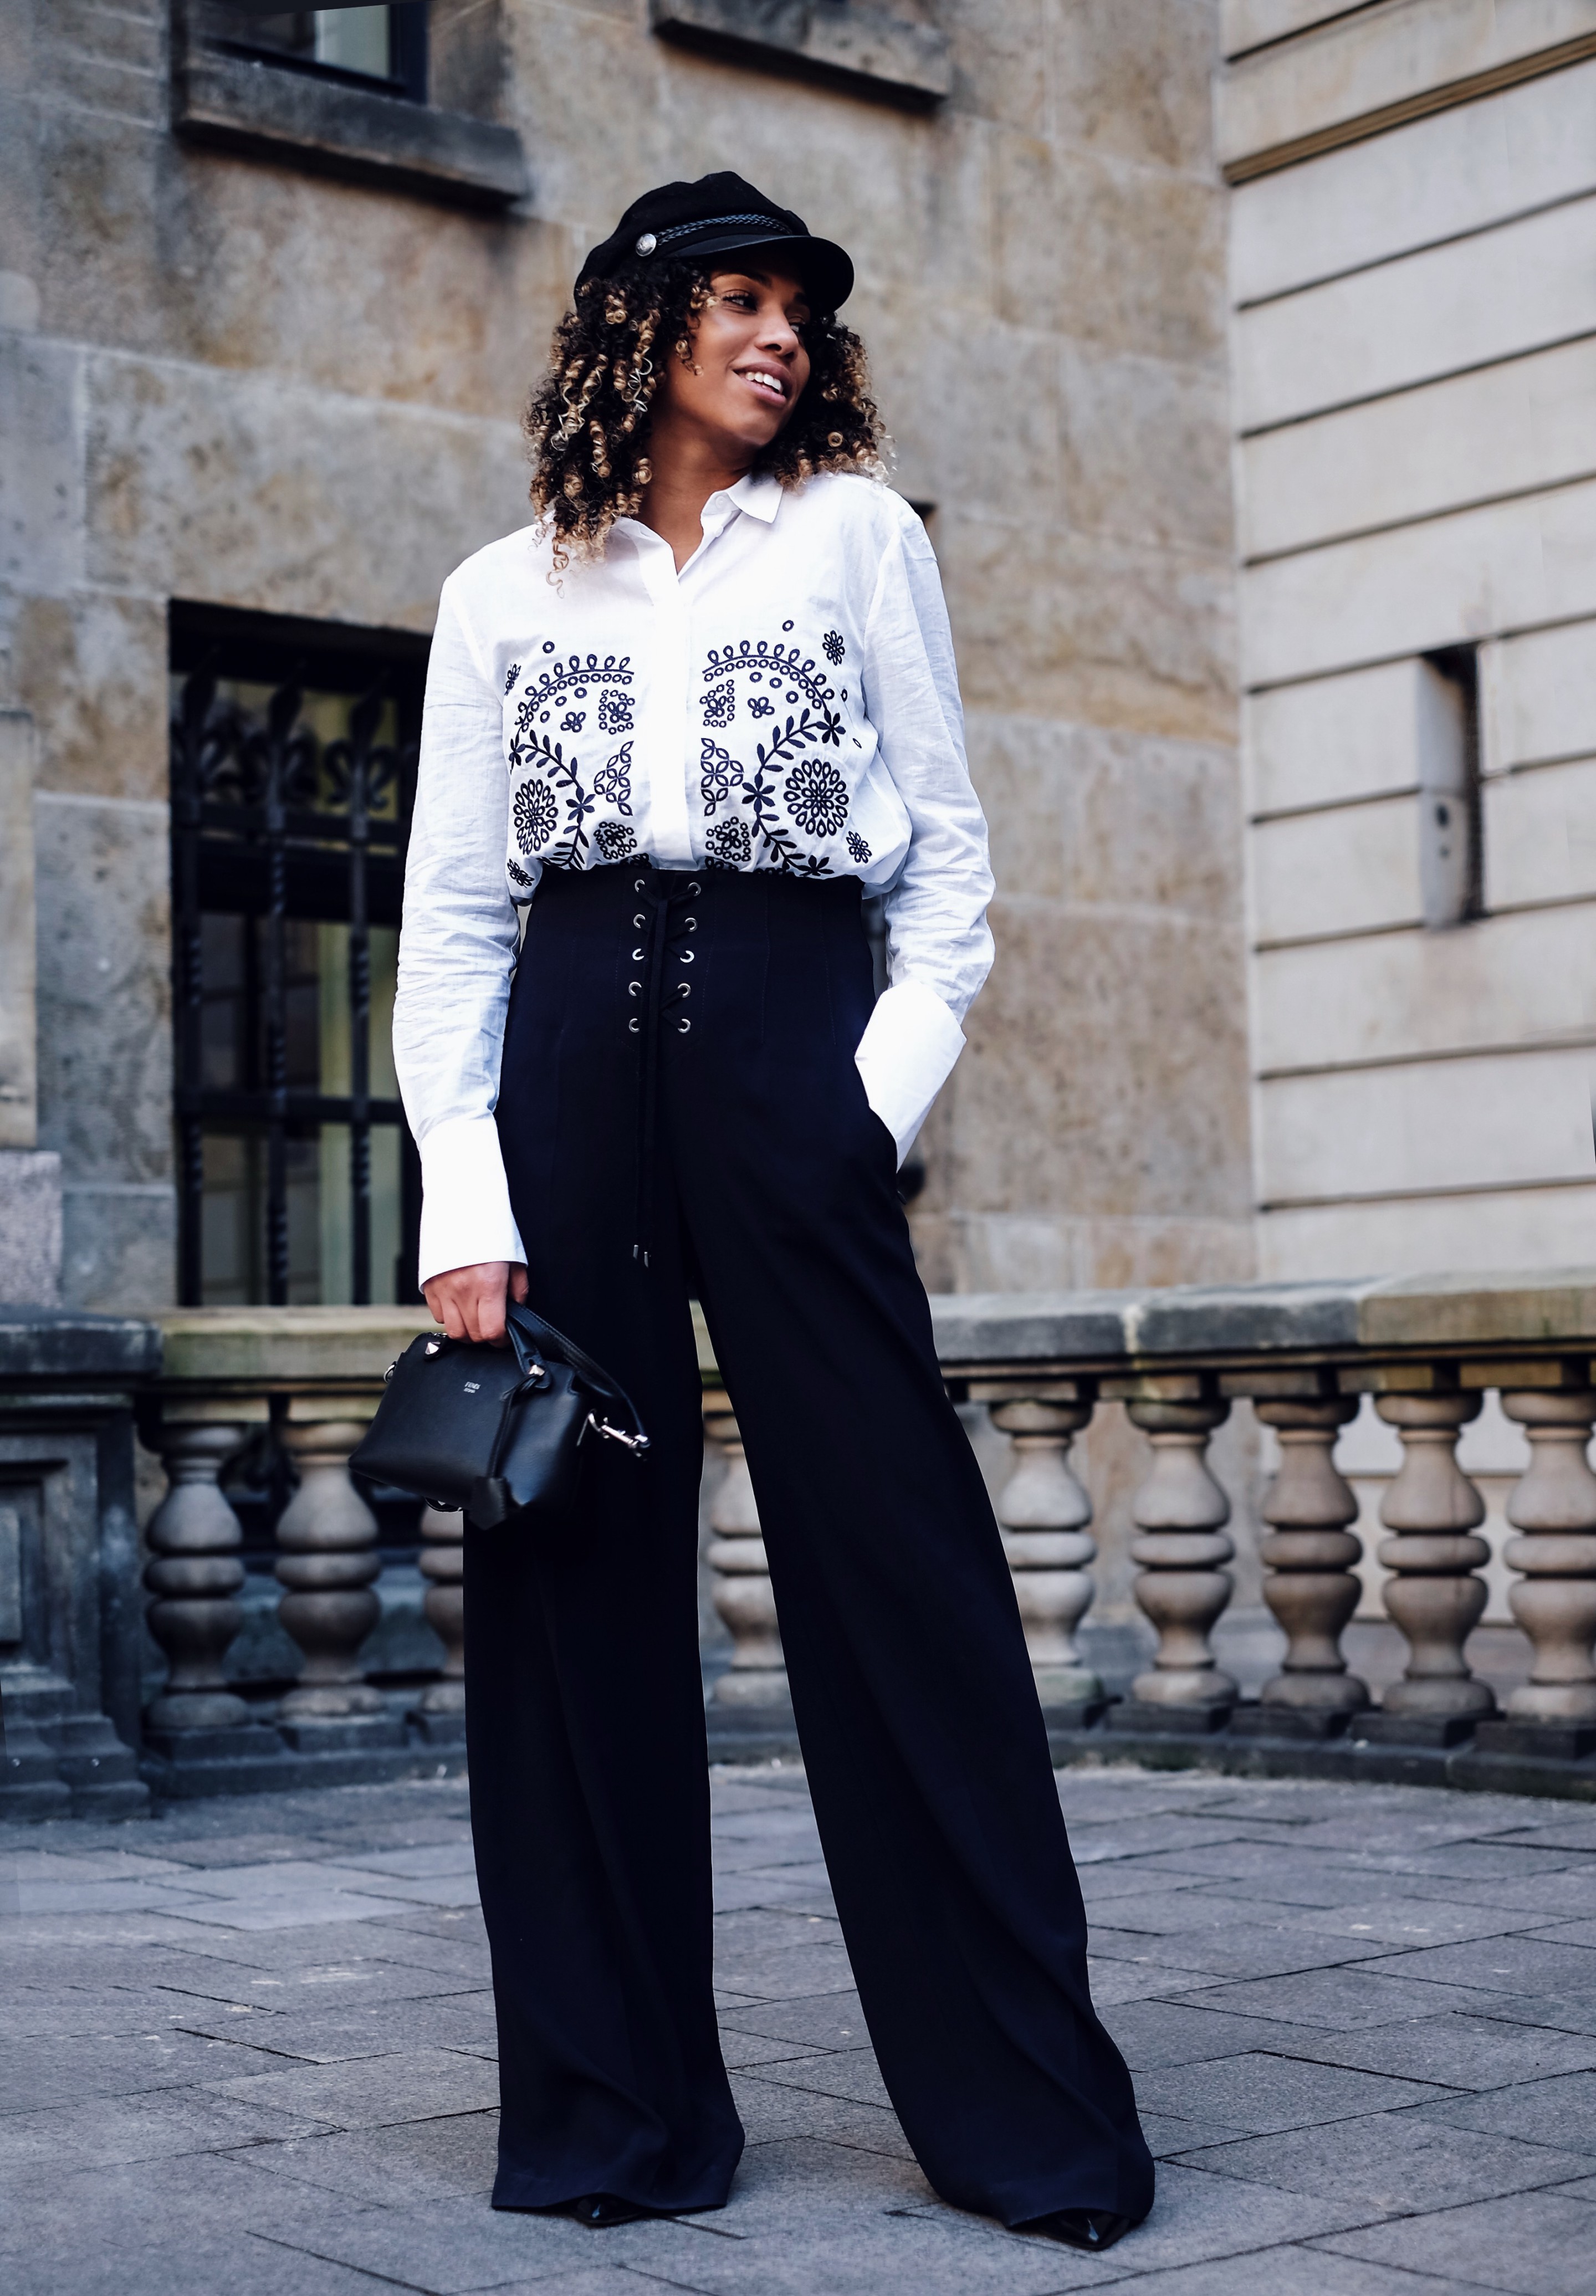 parisienne chic - how to dress for sunday brunch. | Cherifa Akili